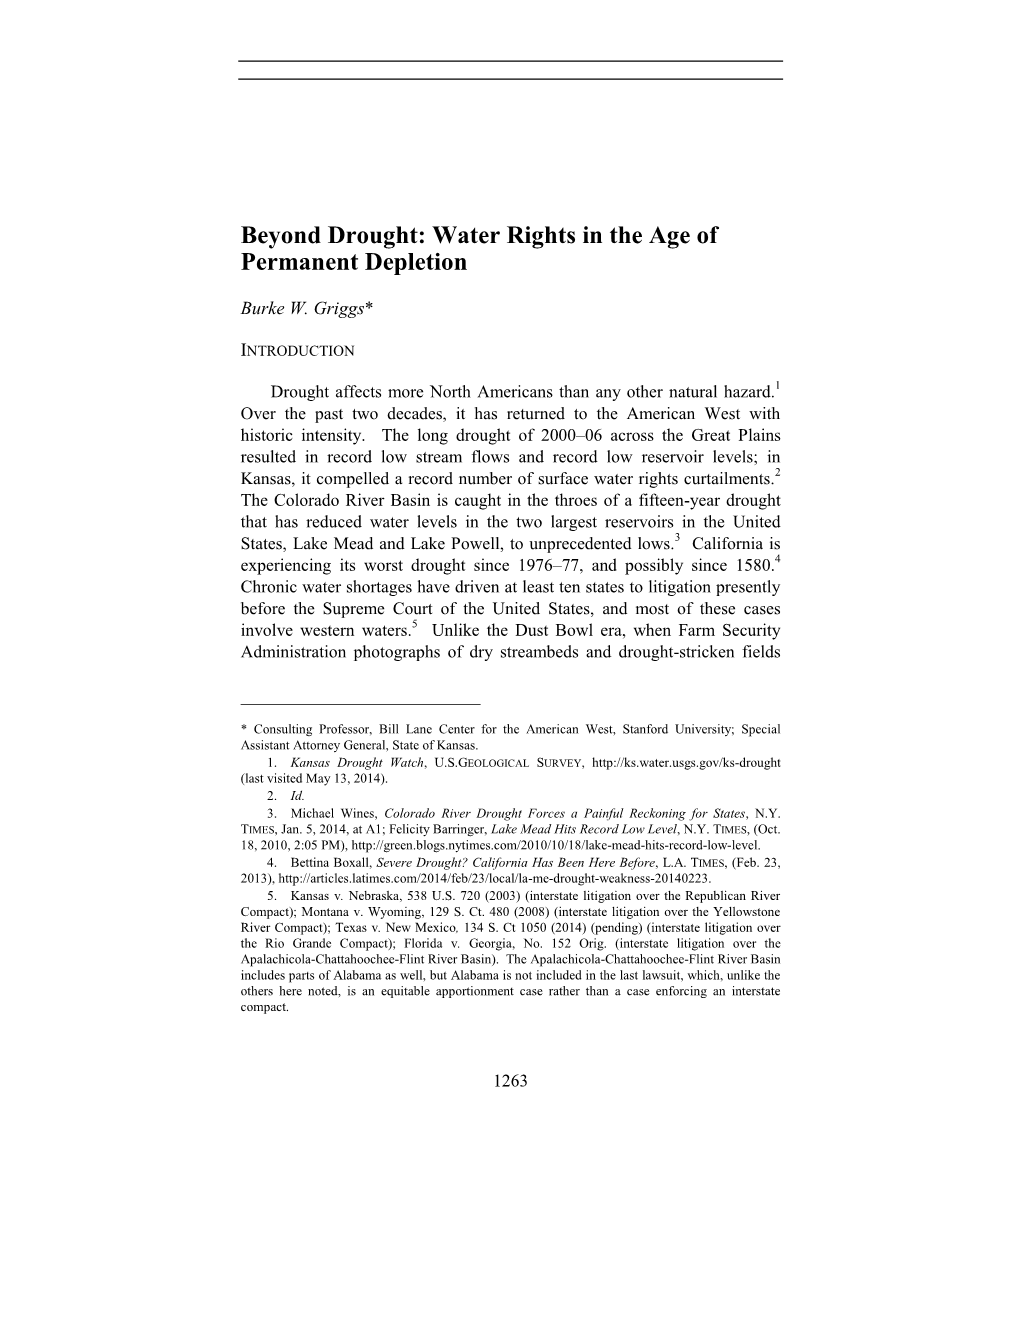 Beyond Drought: Water Rights in the Age of Permanent Depletion